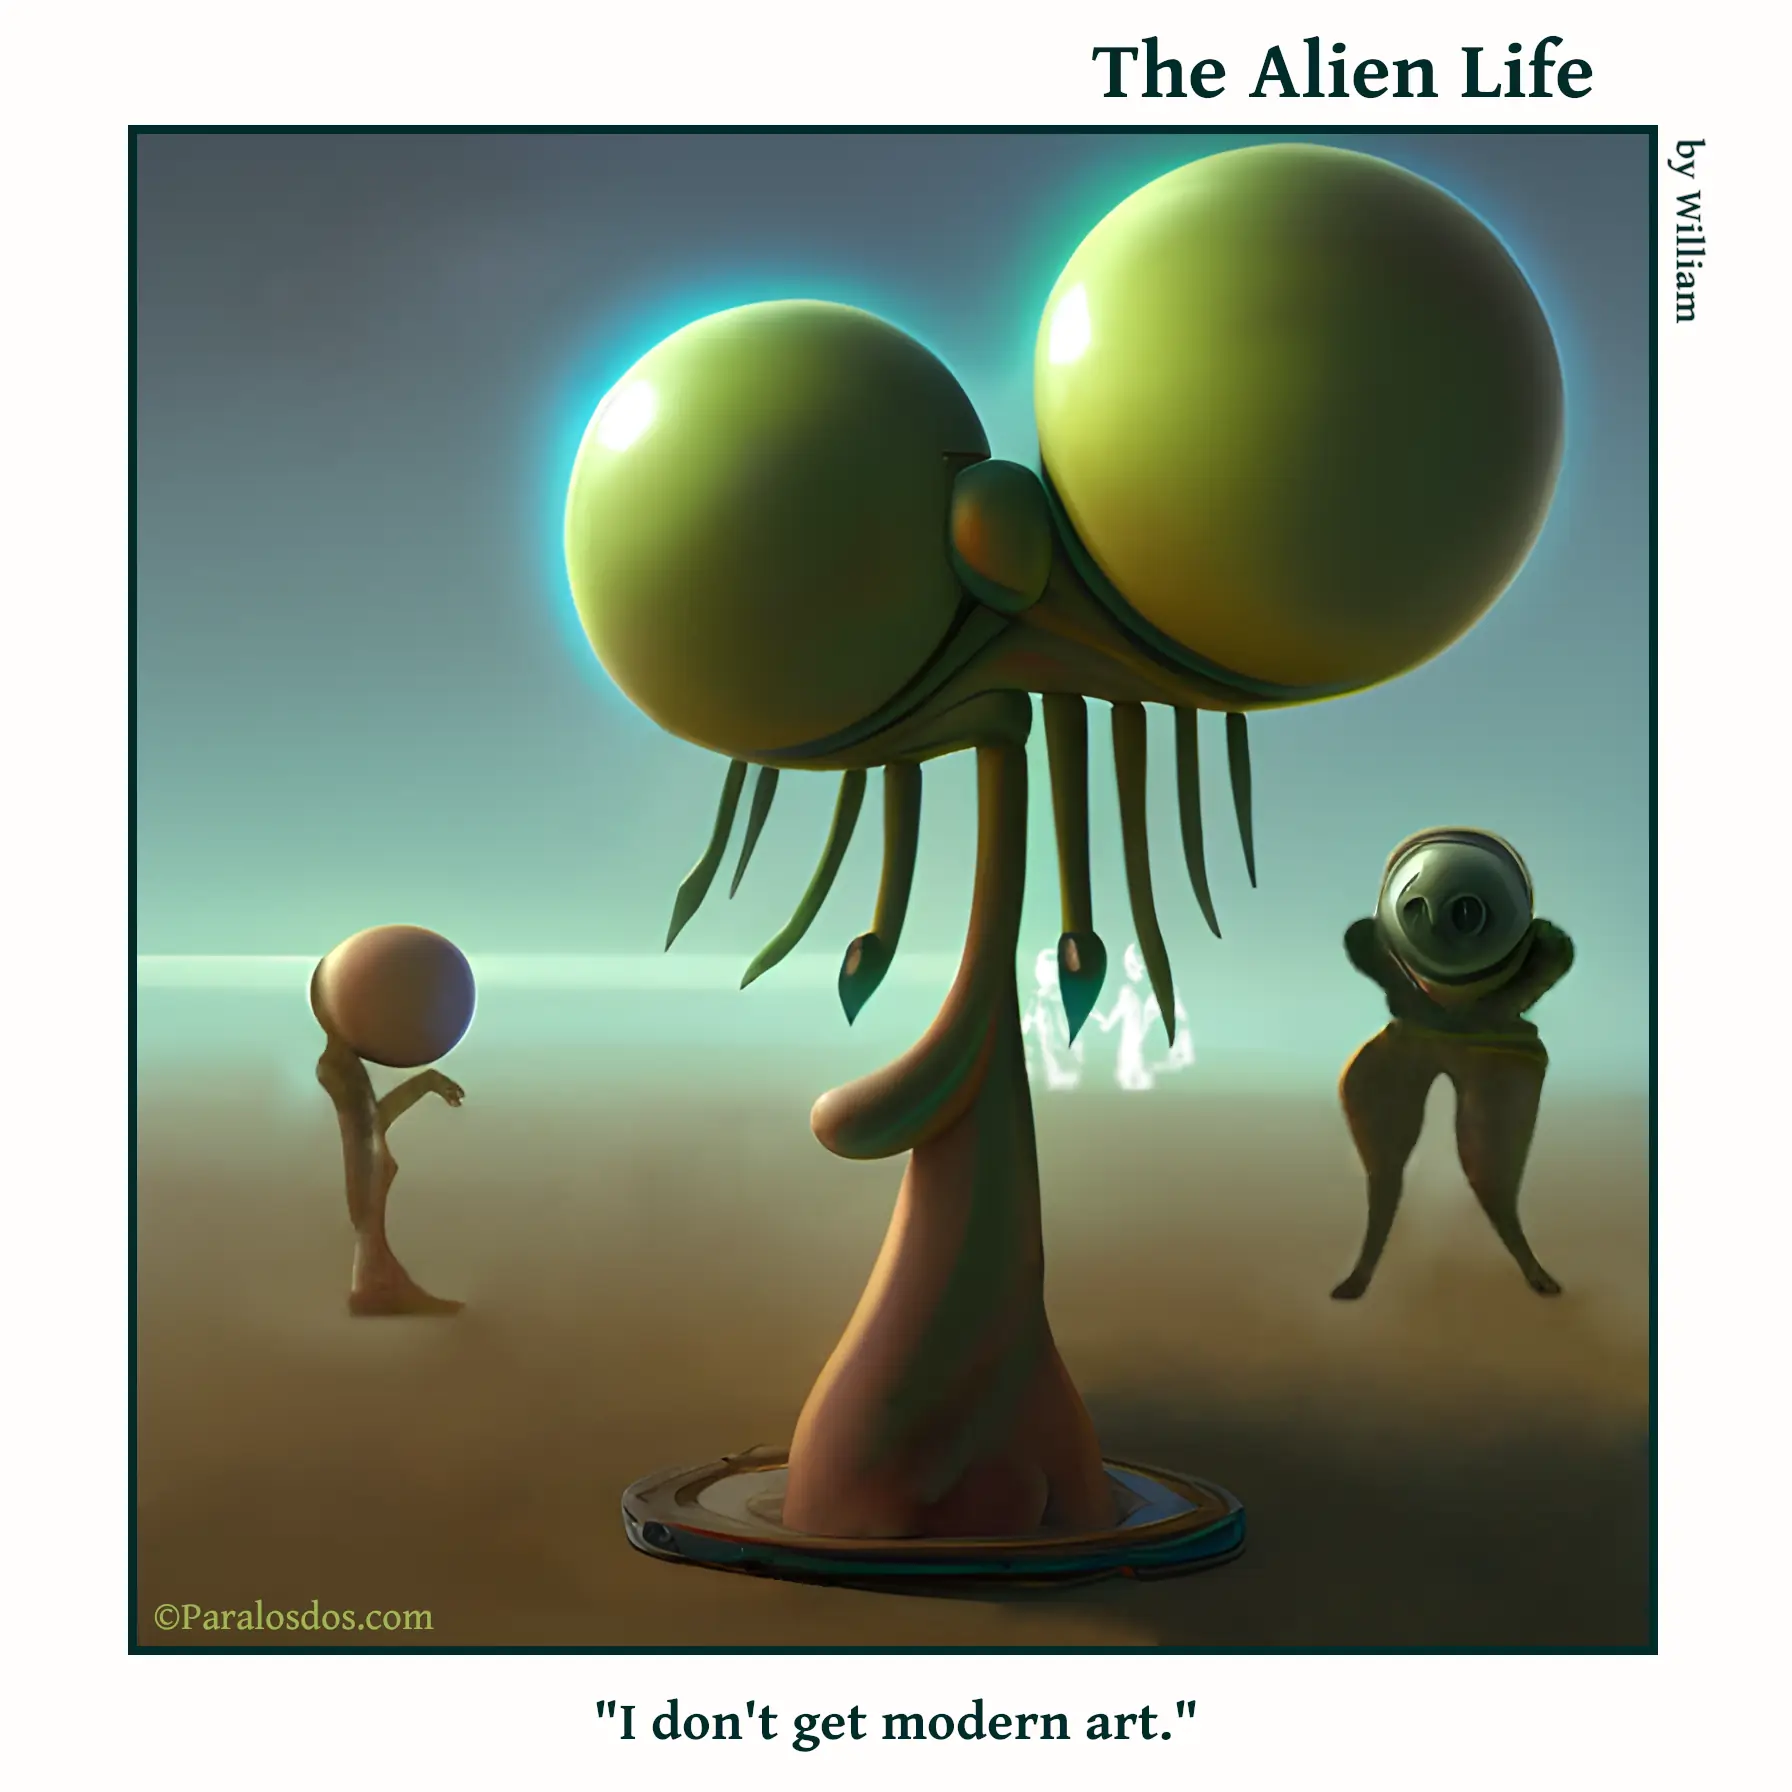 The Alien Life, one panel Comic. Two weird looking aliens are standing on either side of a very weird looking sculpture. The caption reads: "I don't get modern art."